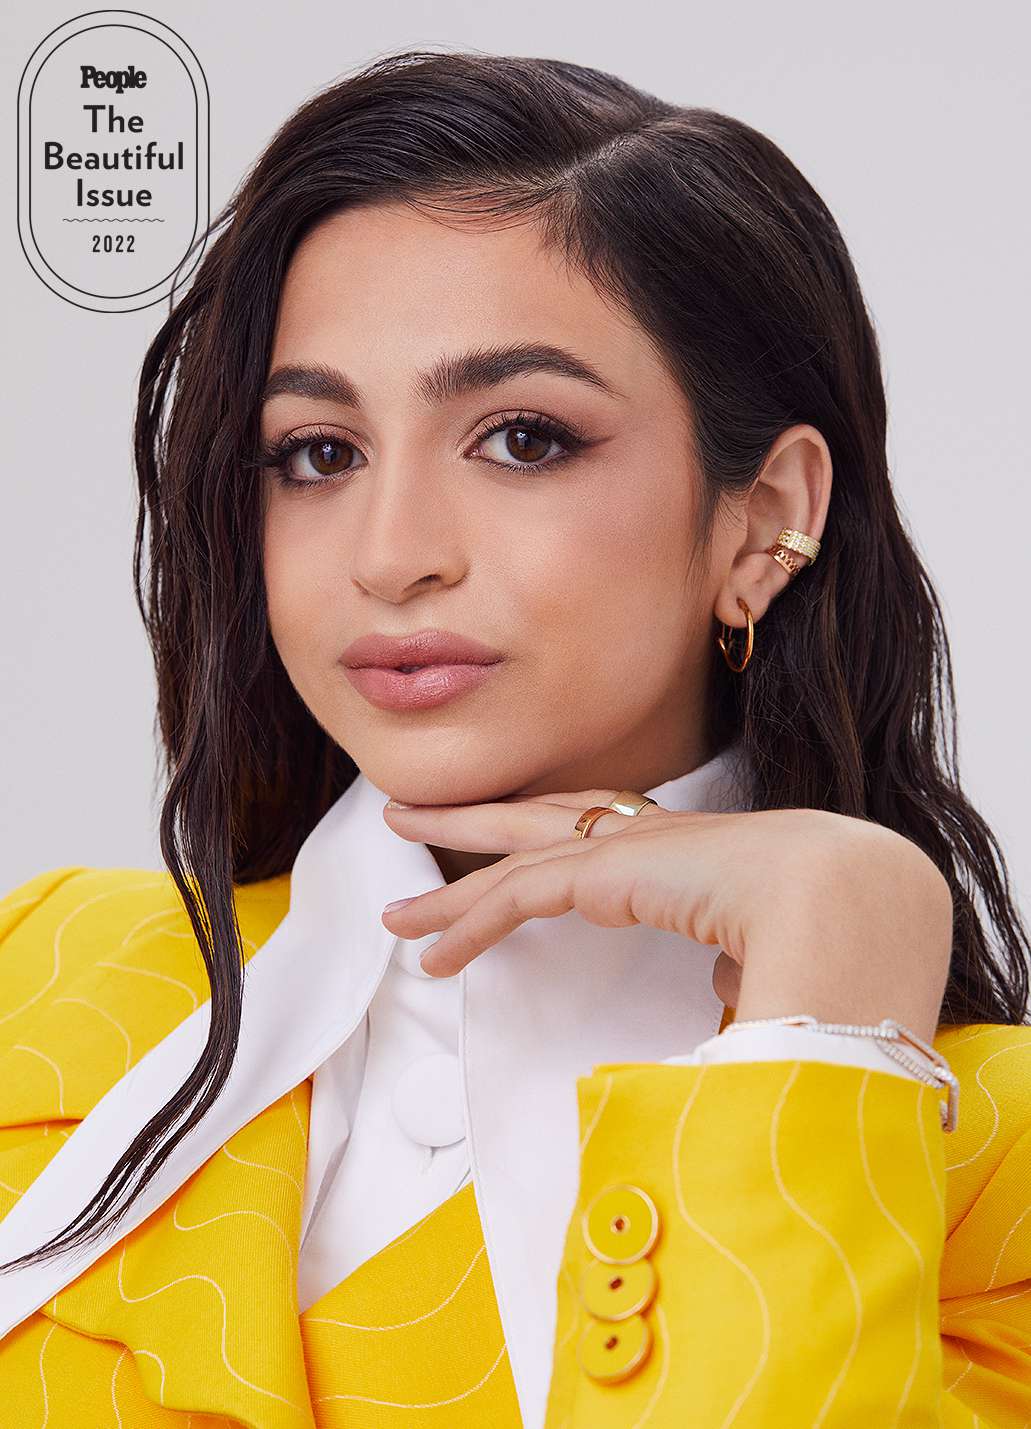 Saved by the Bell Actress Josie Totah Reveals the Best Beauty Advice She Ever Received